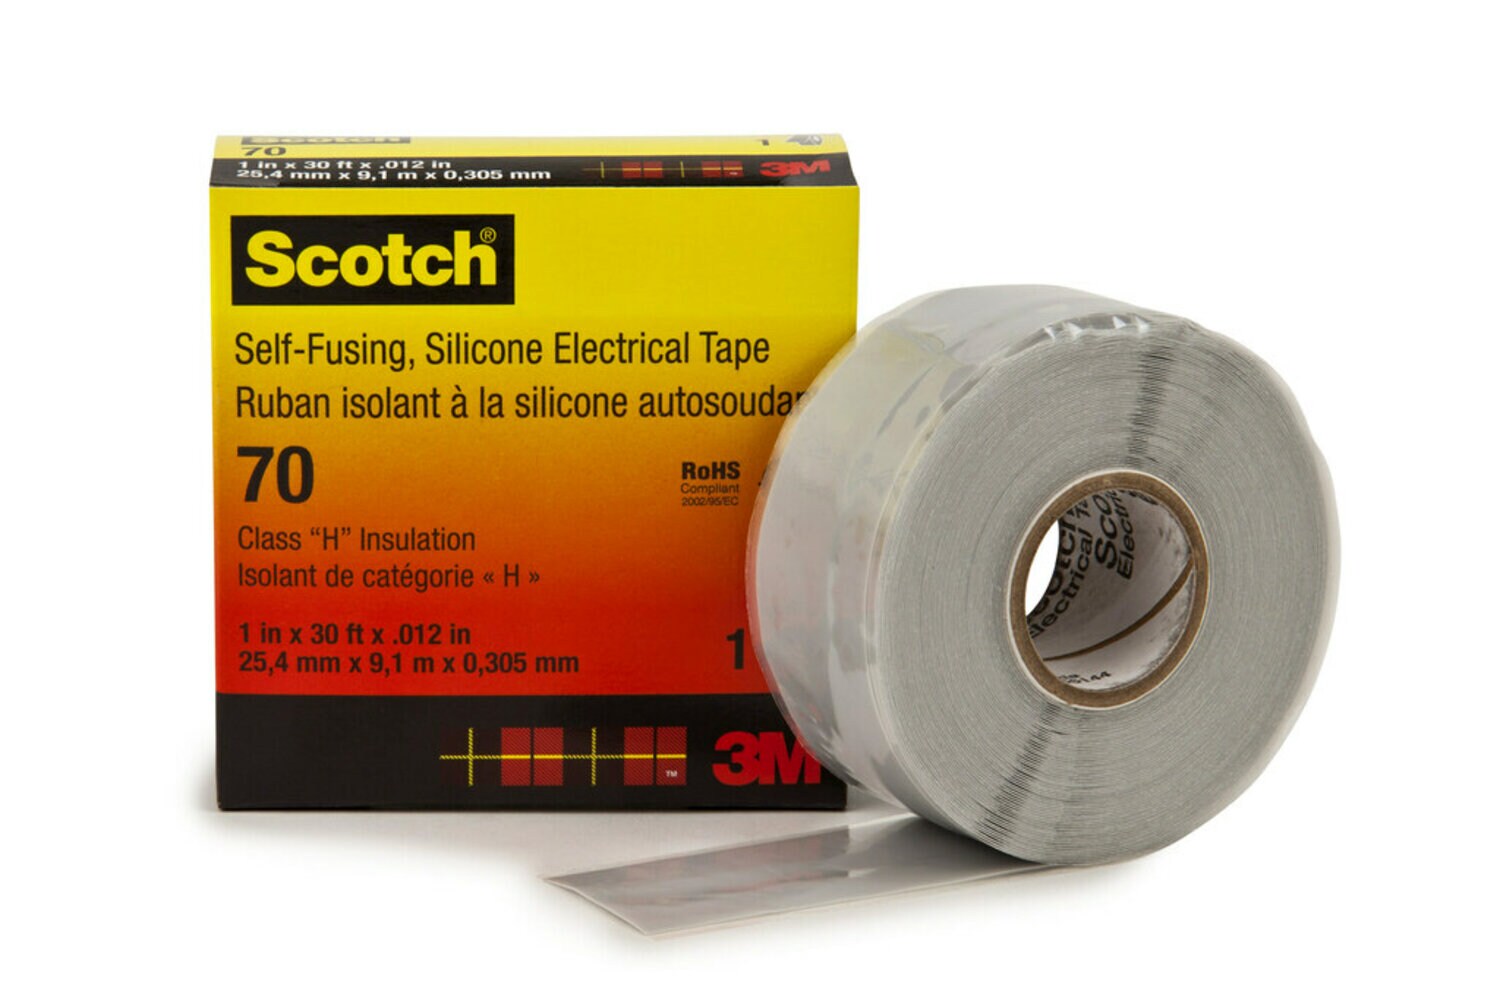 7000006225 - Scotch Self-Fusing Silicone Rubber Electrical Tape 70, 1 in x 30 ft,
Sky Blue/Gray, 1 roll/carton, 24 rolls/case